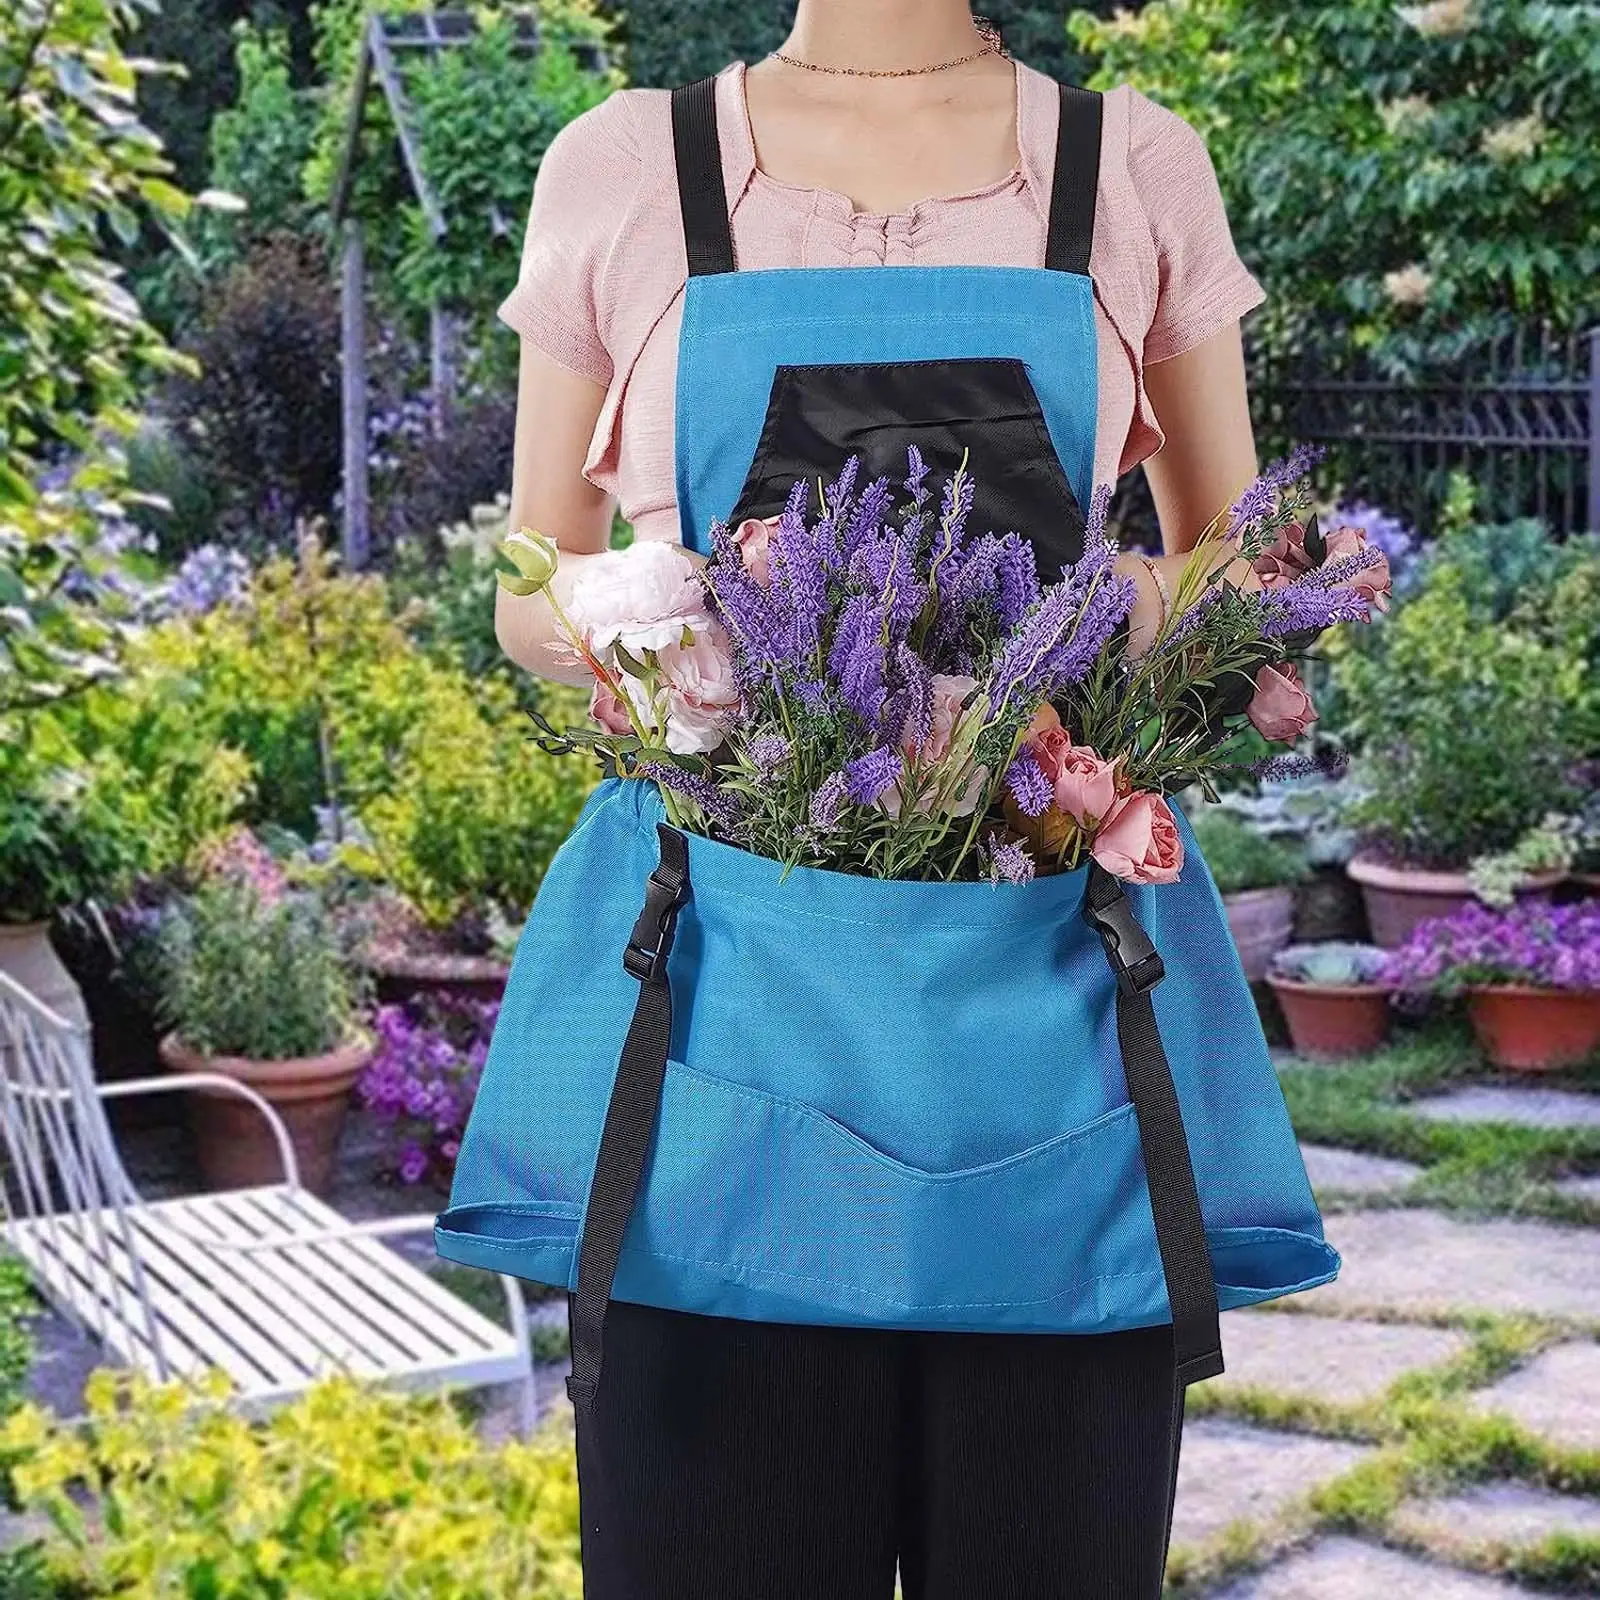 Harvesting Pouch Adjustable Straps Harvest Pouch Canvas Gardening Apron with Pockets for Gardening Harvesting Weeding